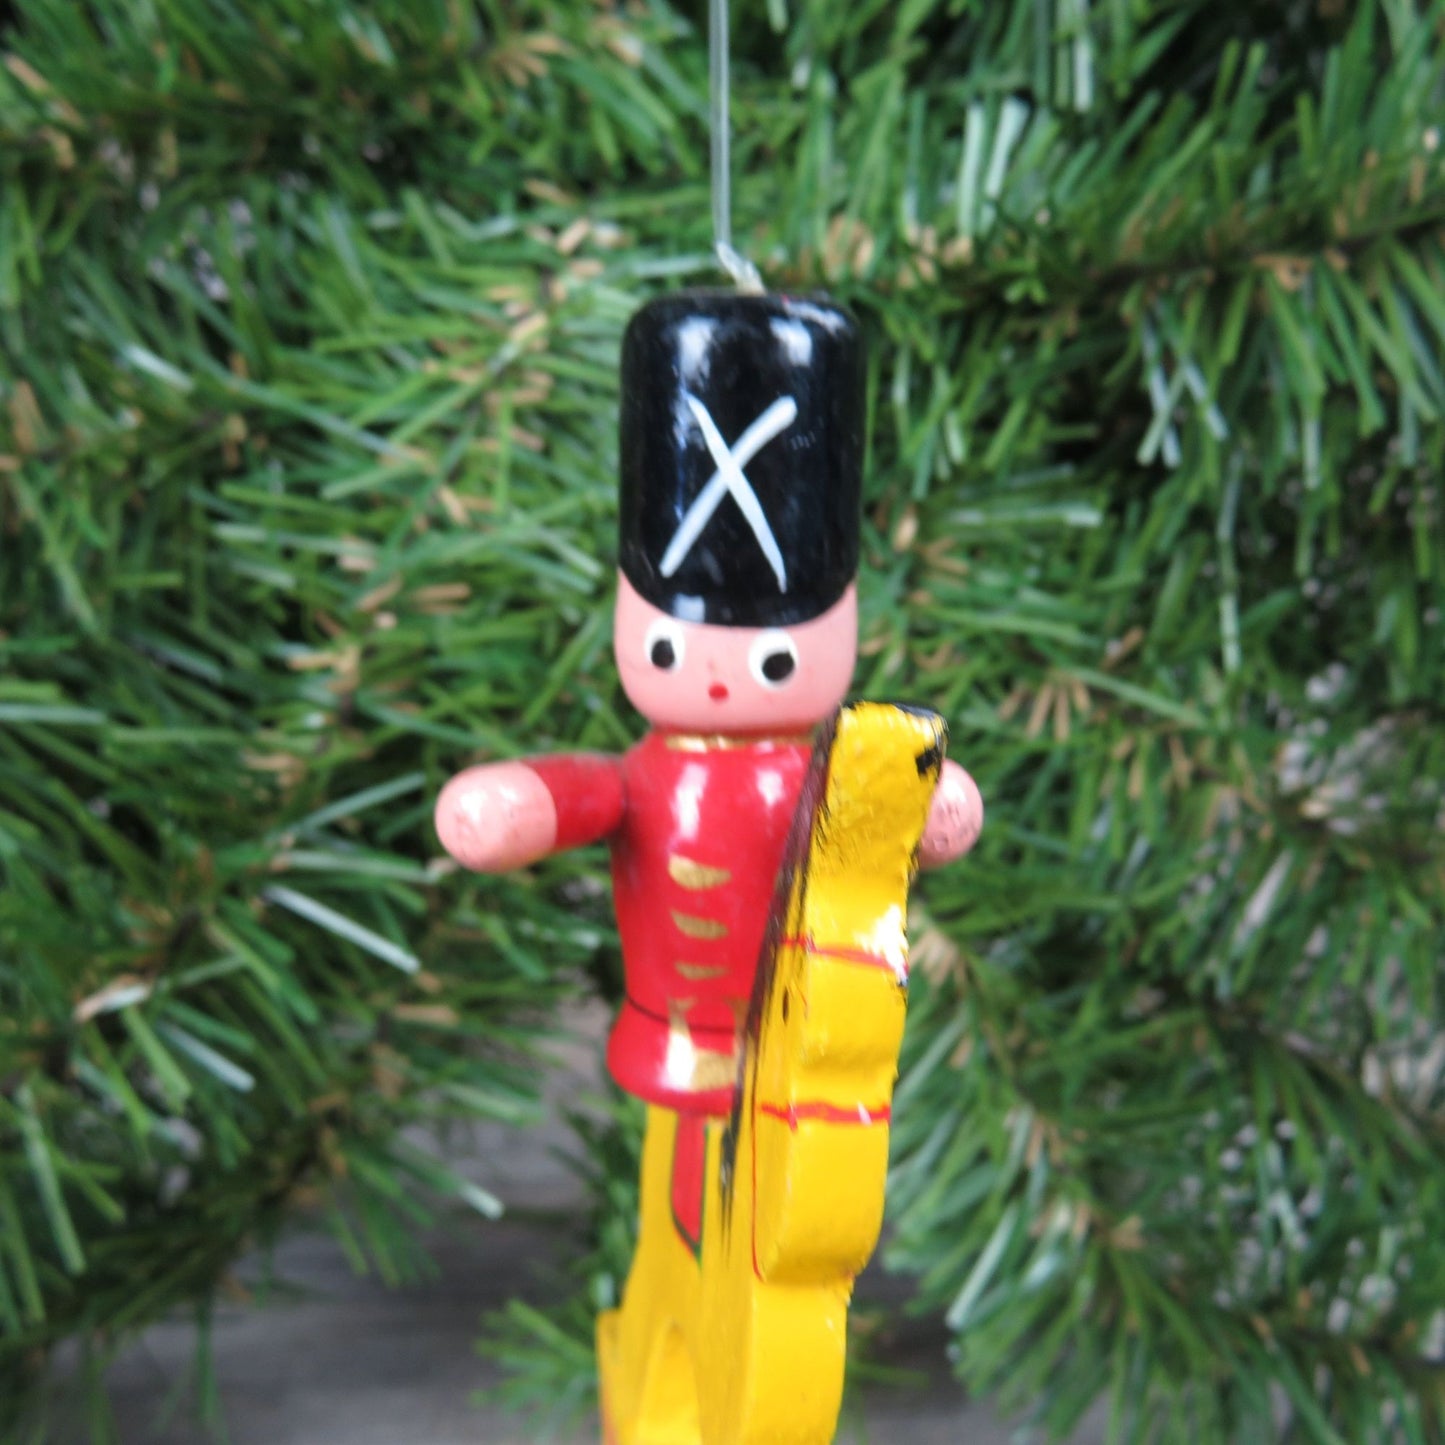 Vintage Soldier on Wooden Rocking Horse Ornament Yellow Toy Pony Red